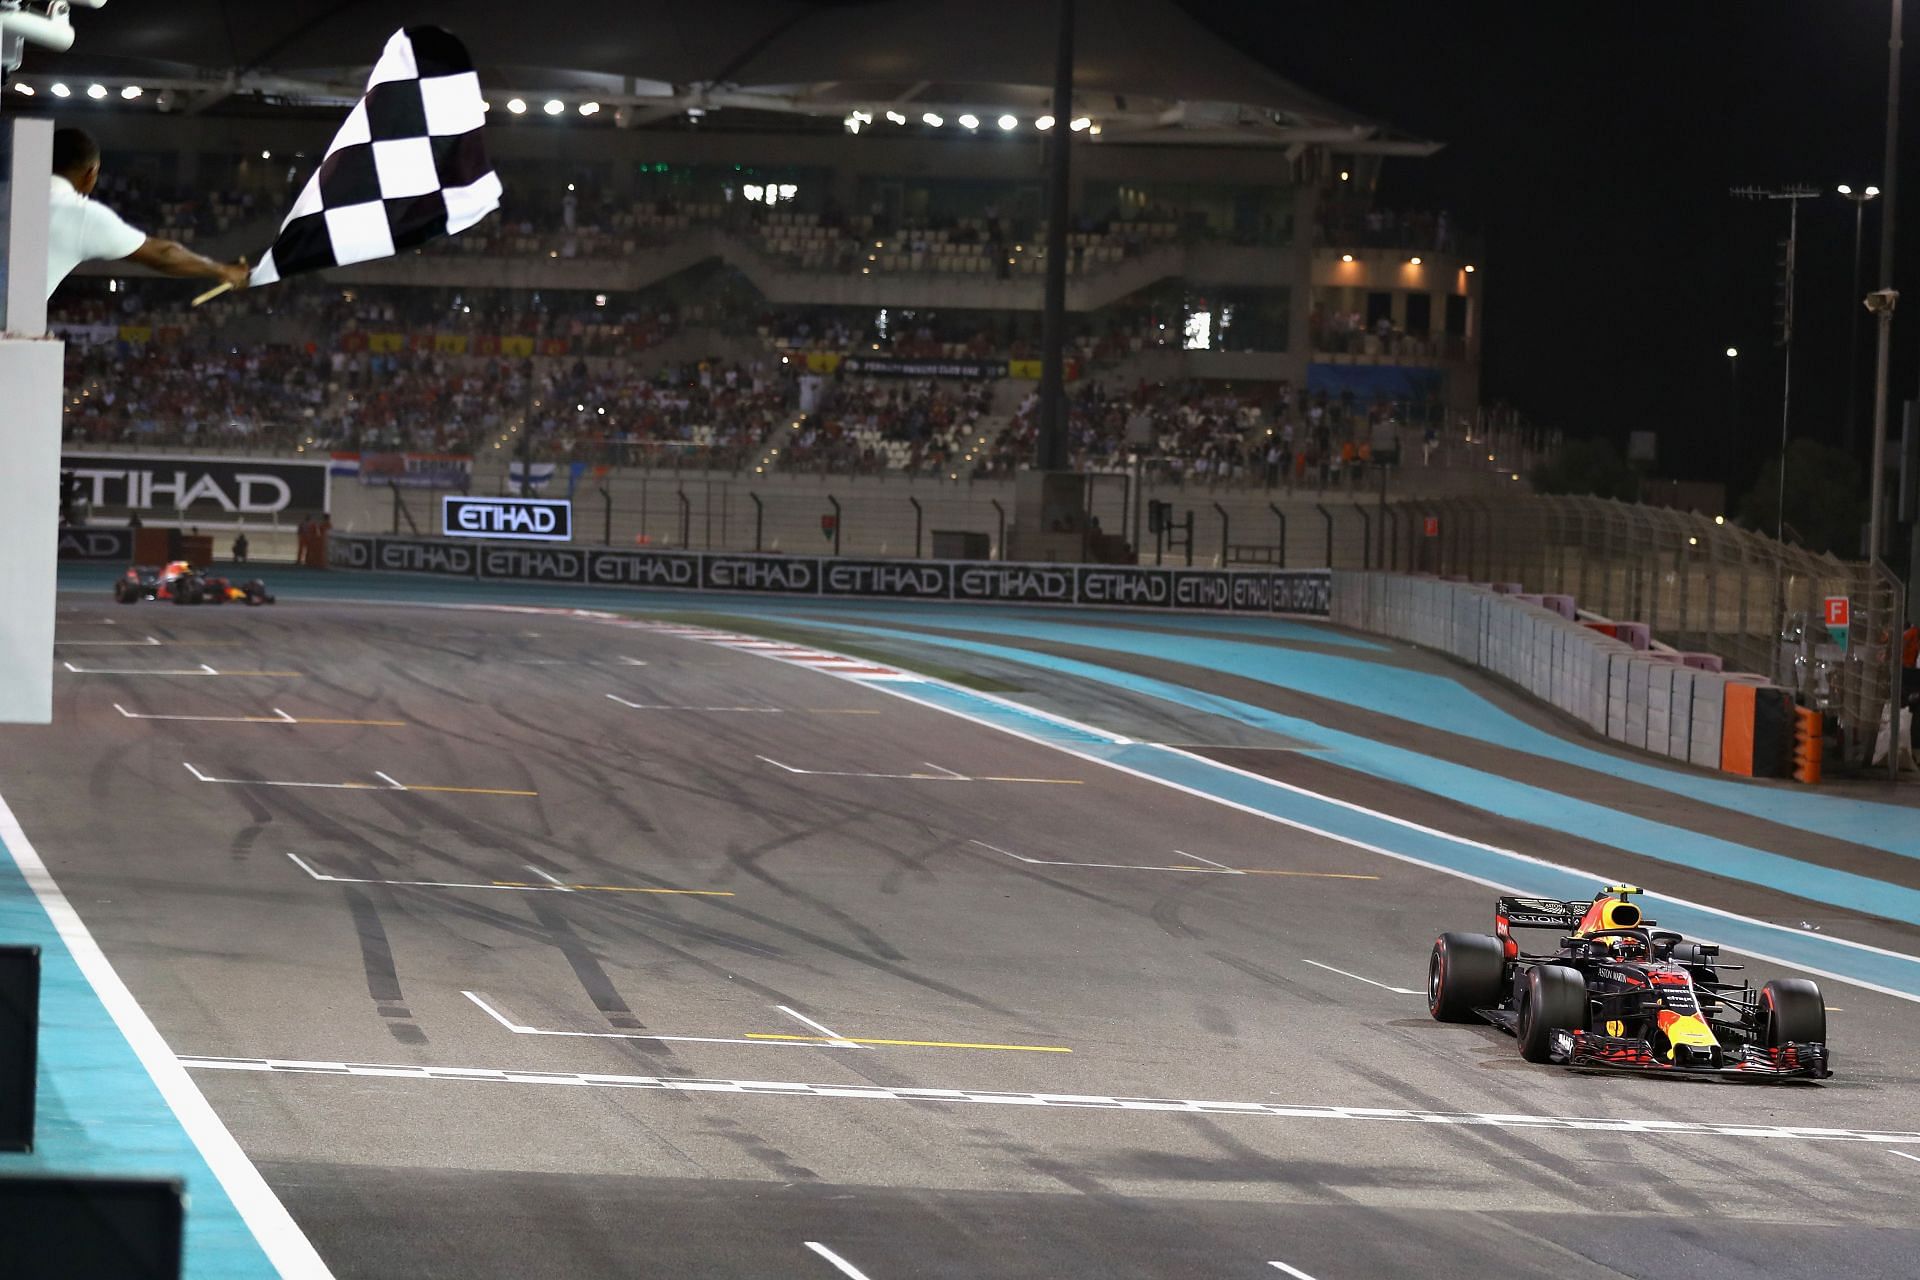 The ending of the Abu Dhabi Grand Prix left everyone shocked